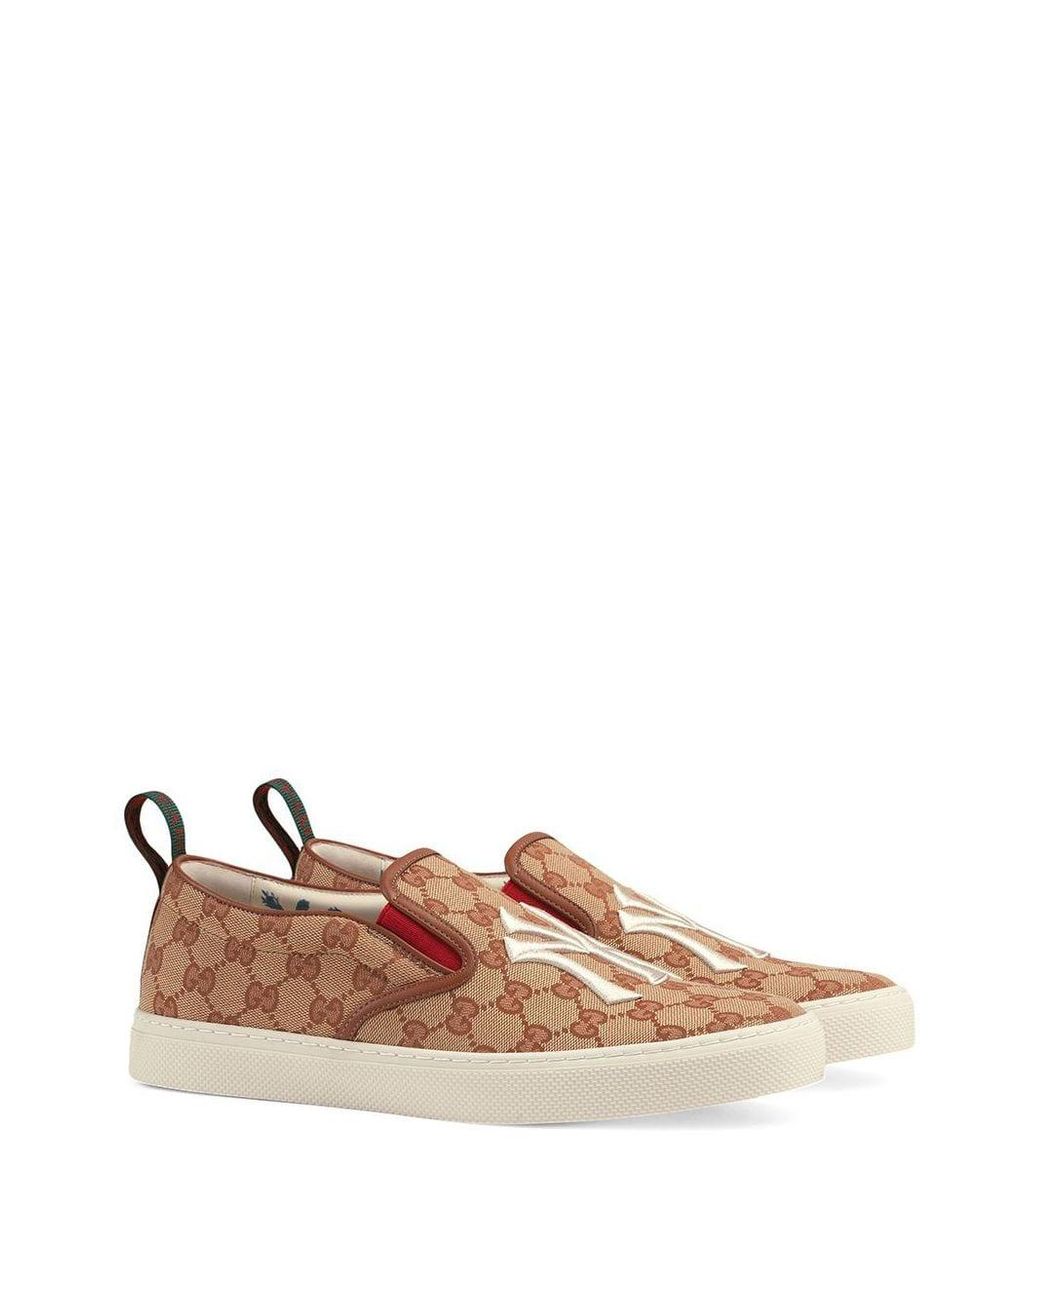 Gucci Canvas Men's Slip-on Sneaker With Ny Yankees Patchtm in 